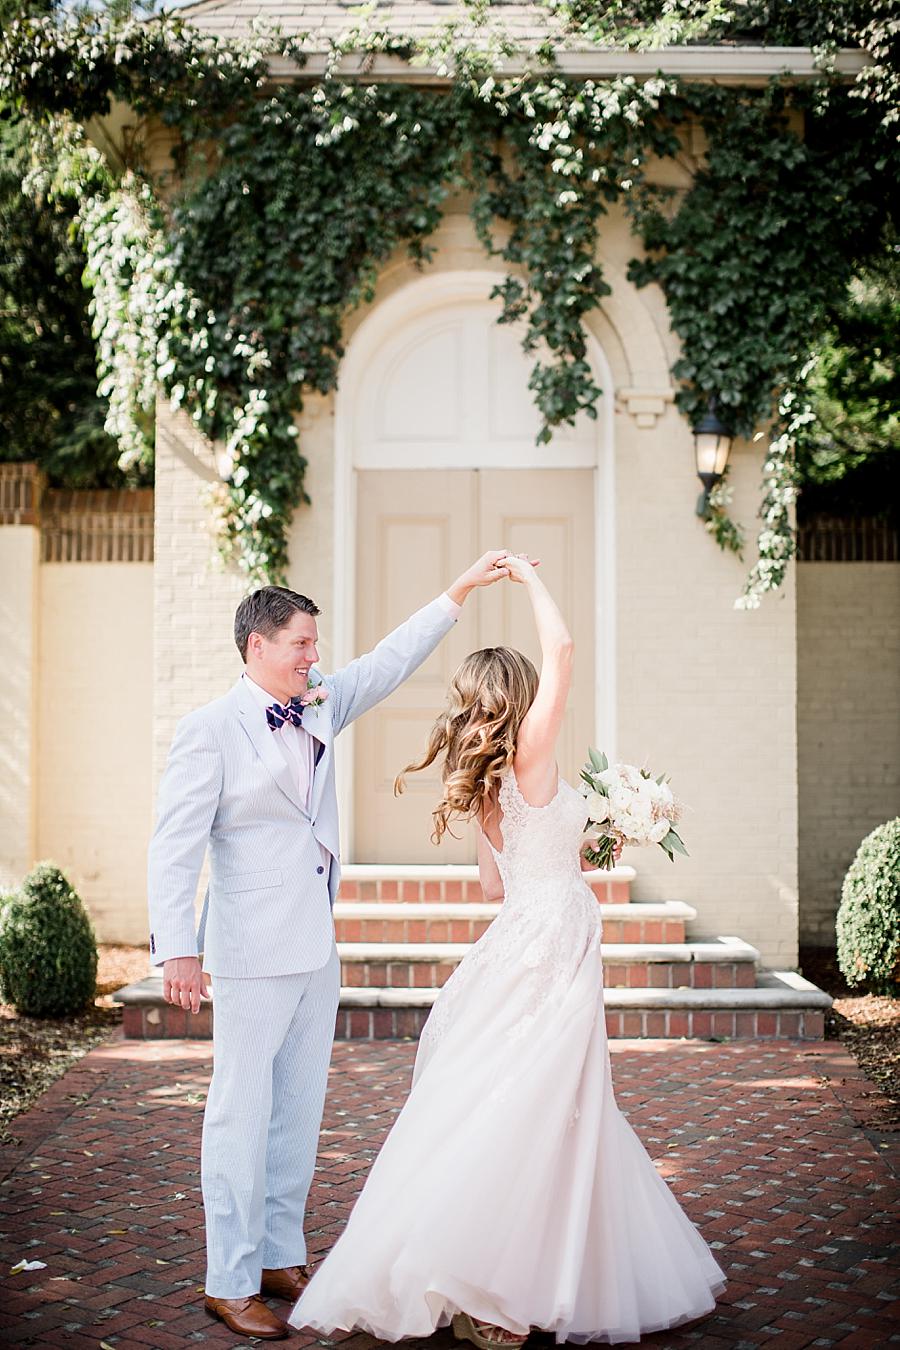 Spinning at this East Ivy Mansion Wedding session by Knoxville Wedding Photographer, Amanda May Photos.